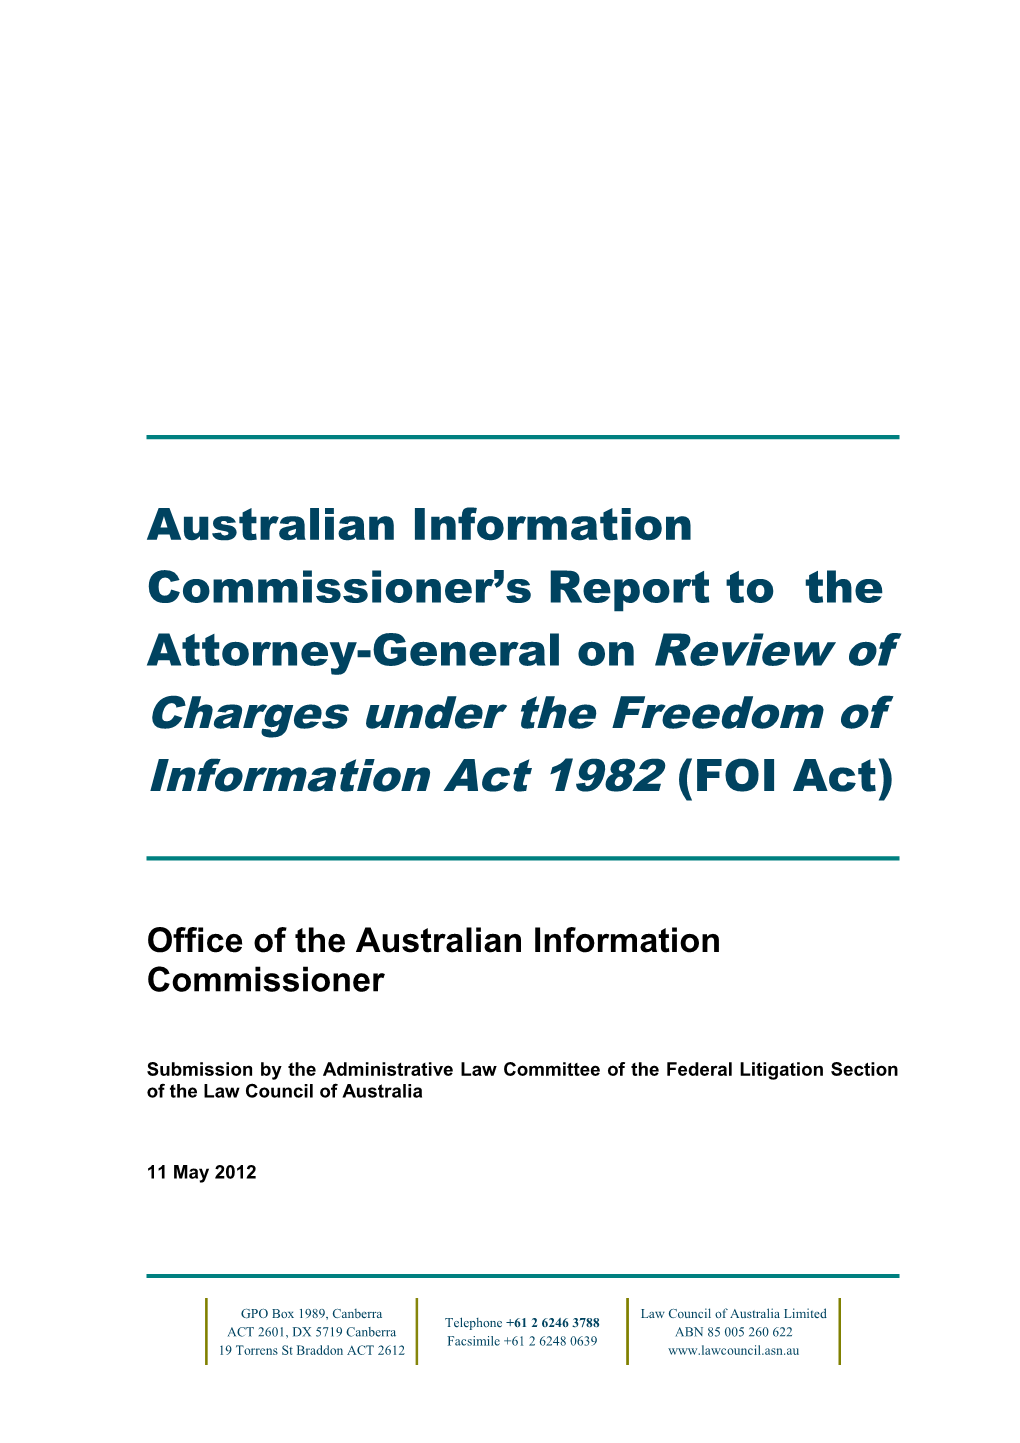 Office of the Australian Information Commissioner s1